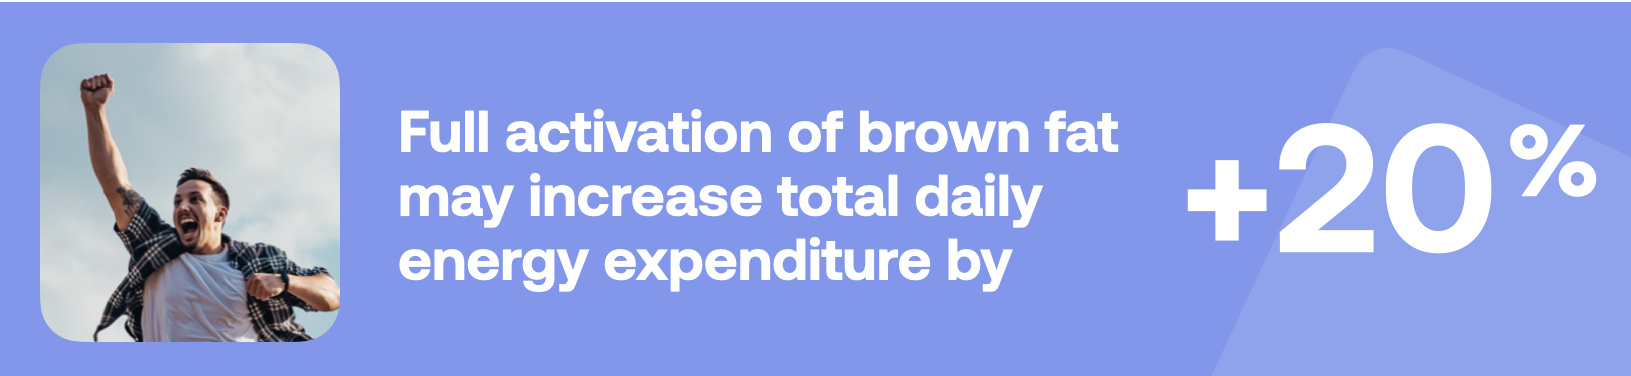 Full activation of brown fat may increase total daily energy expenditure by +20%